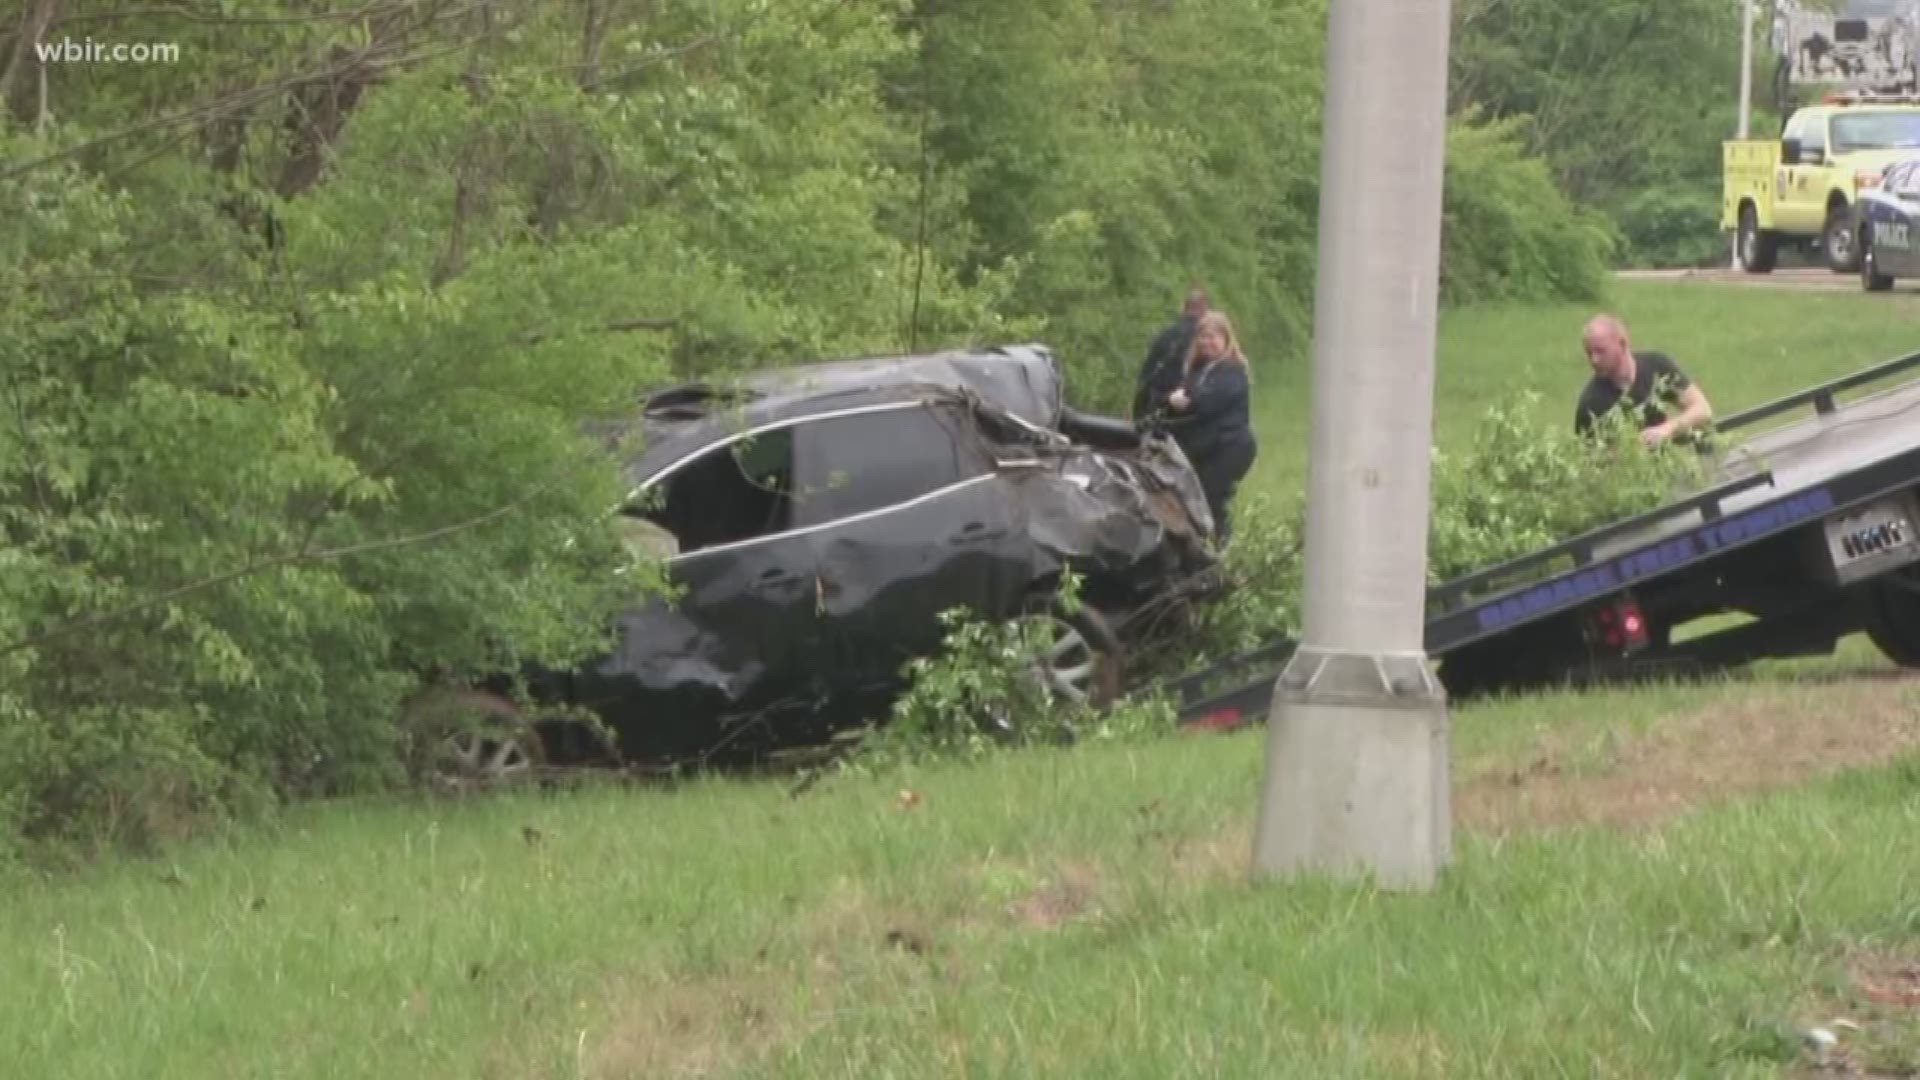 According to Knoxville Police, the driver was speeding and lost control of the car.